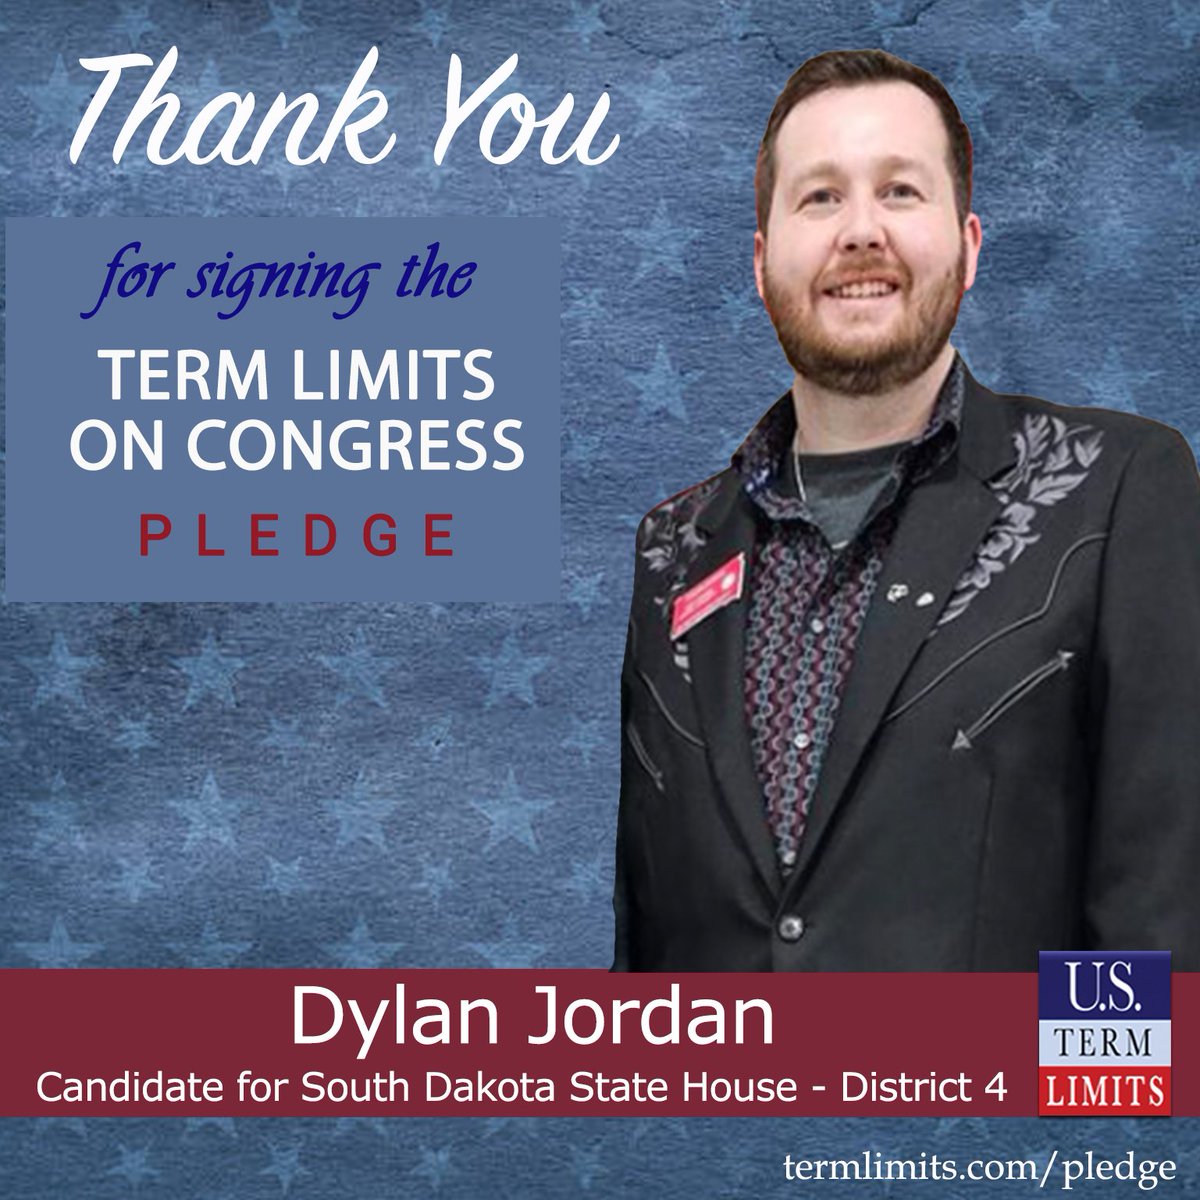 Thank you @dcjordan94 for signing the #termlimits on Congress pledge. termlimits.com/wp-content/upl…